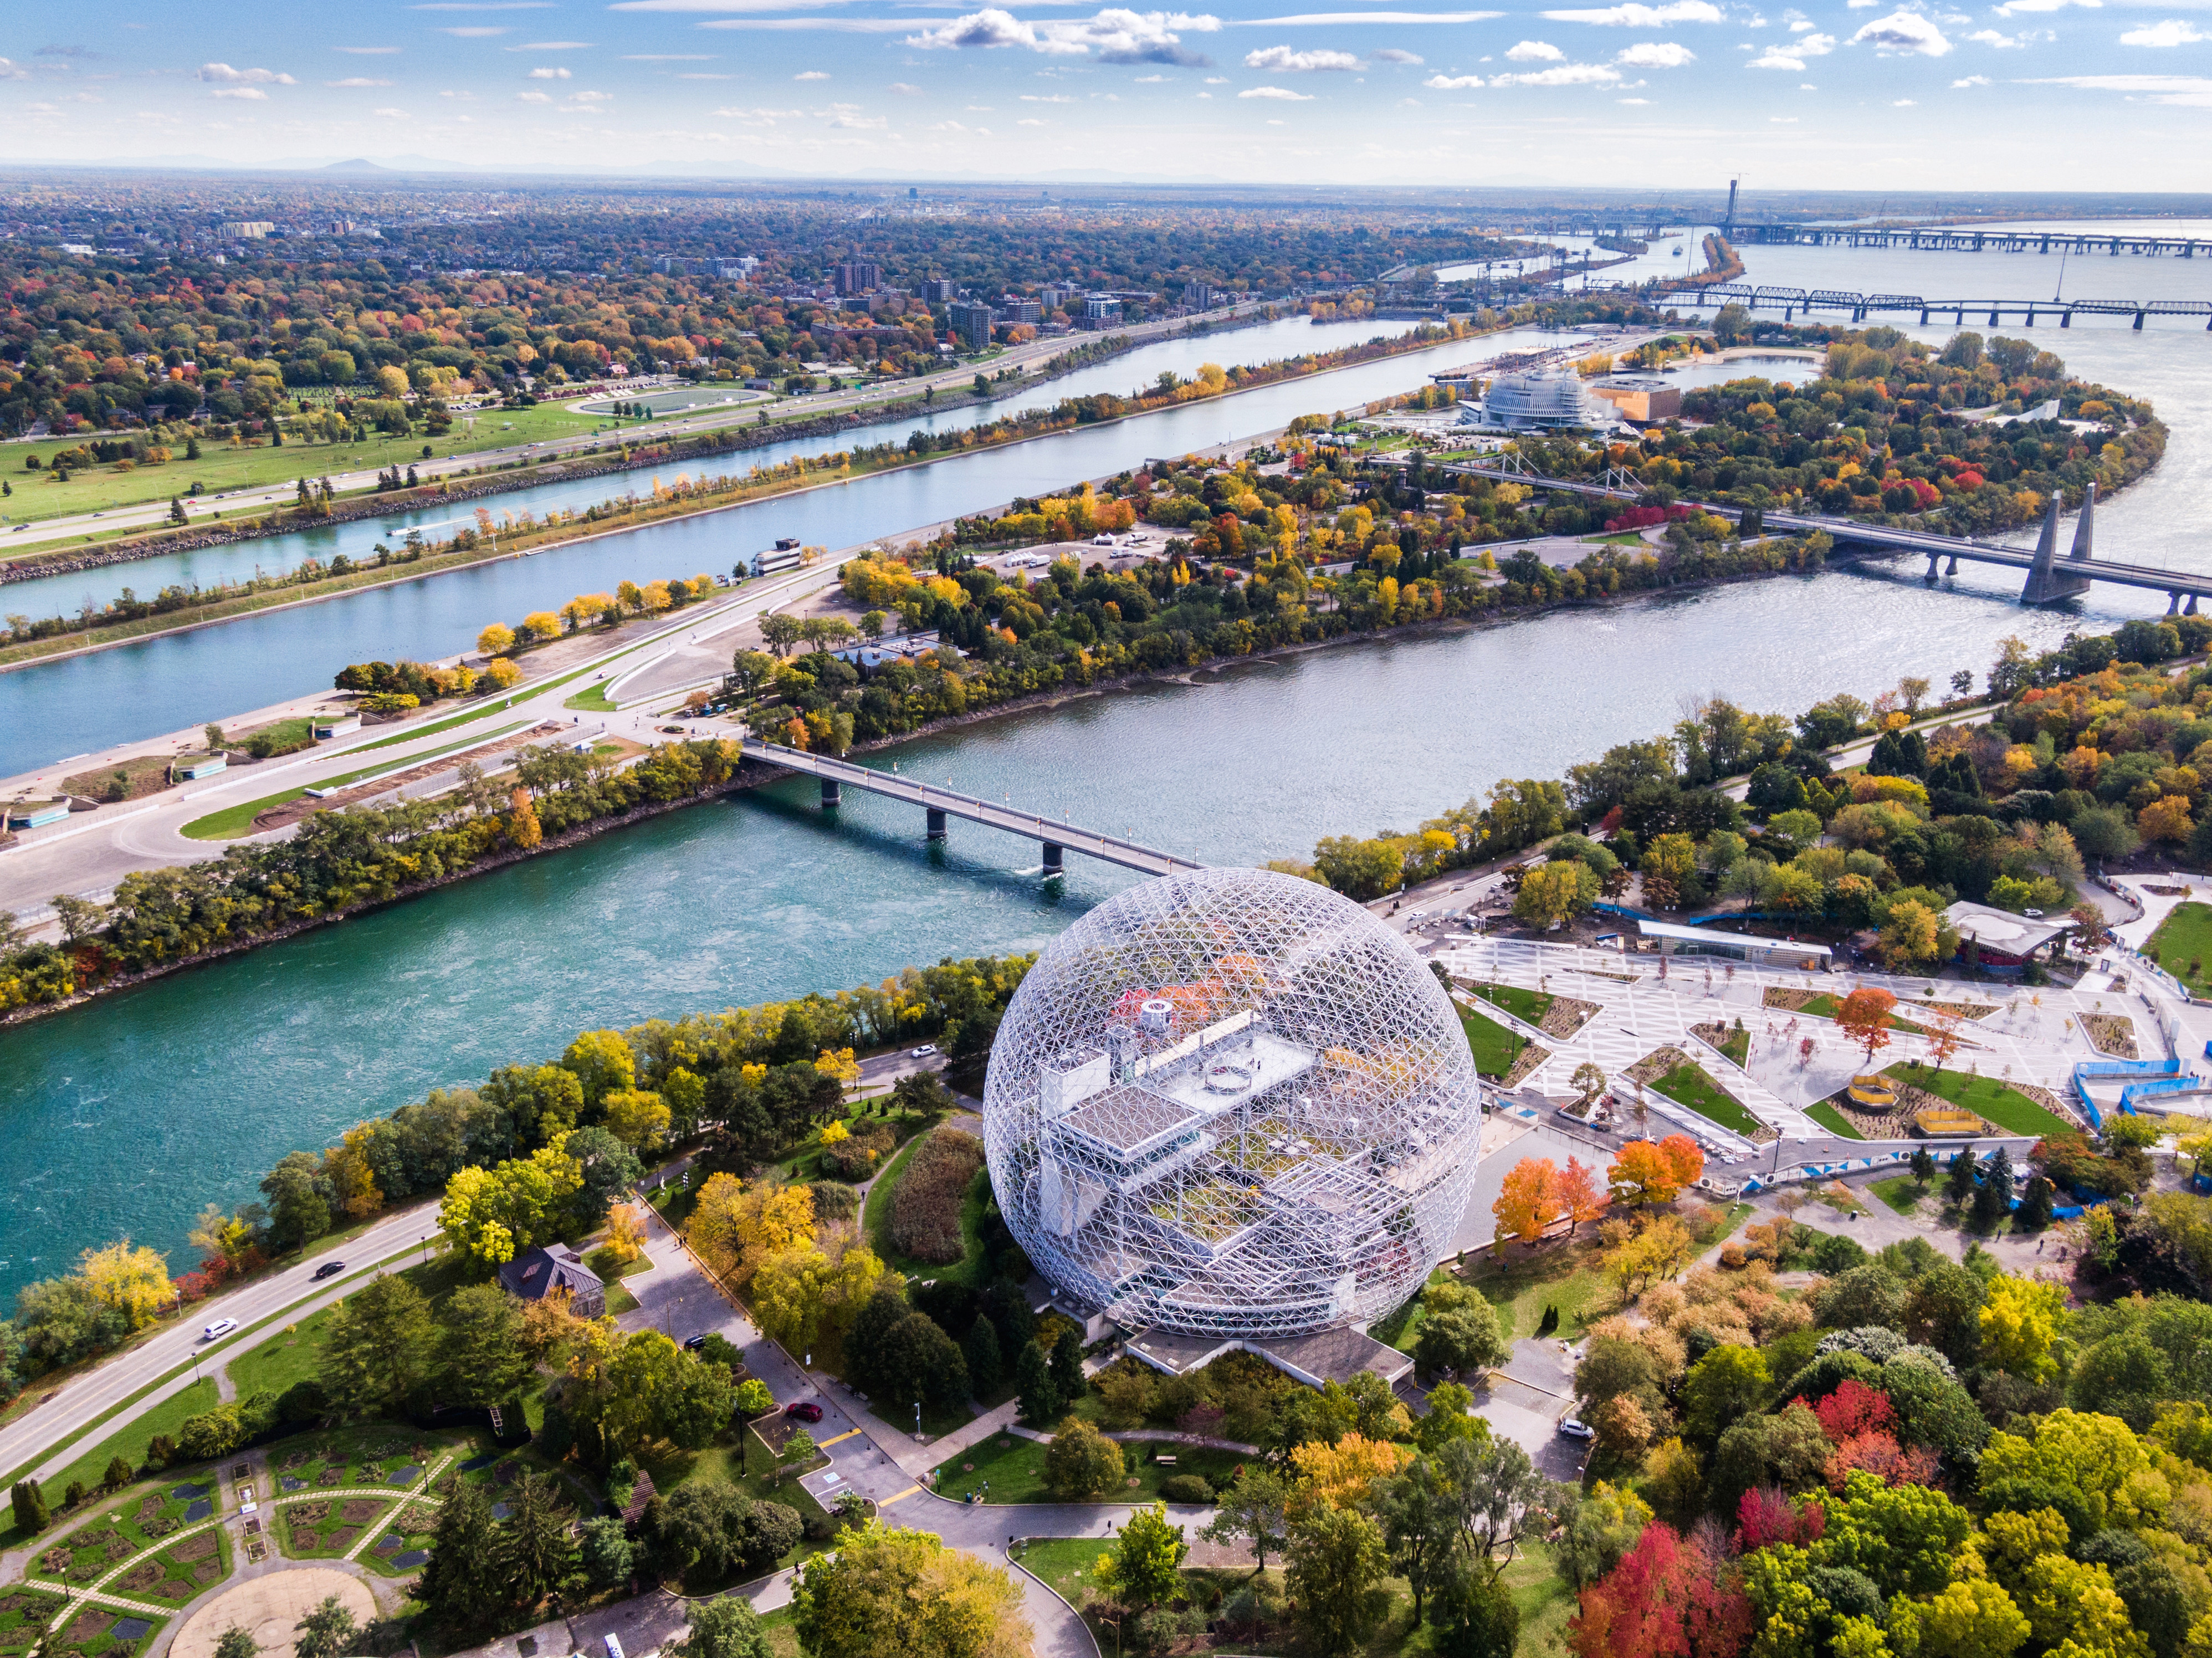 Montreal, shown featuring the Biosphere Environment Museum and S Lawrence River, will host COP15 in December. Photo: Shutterstock Images